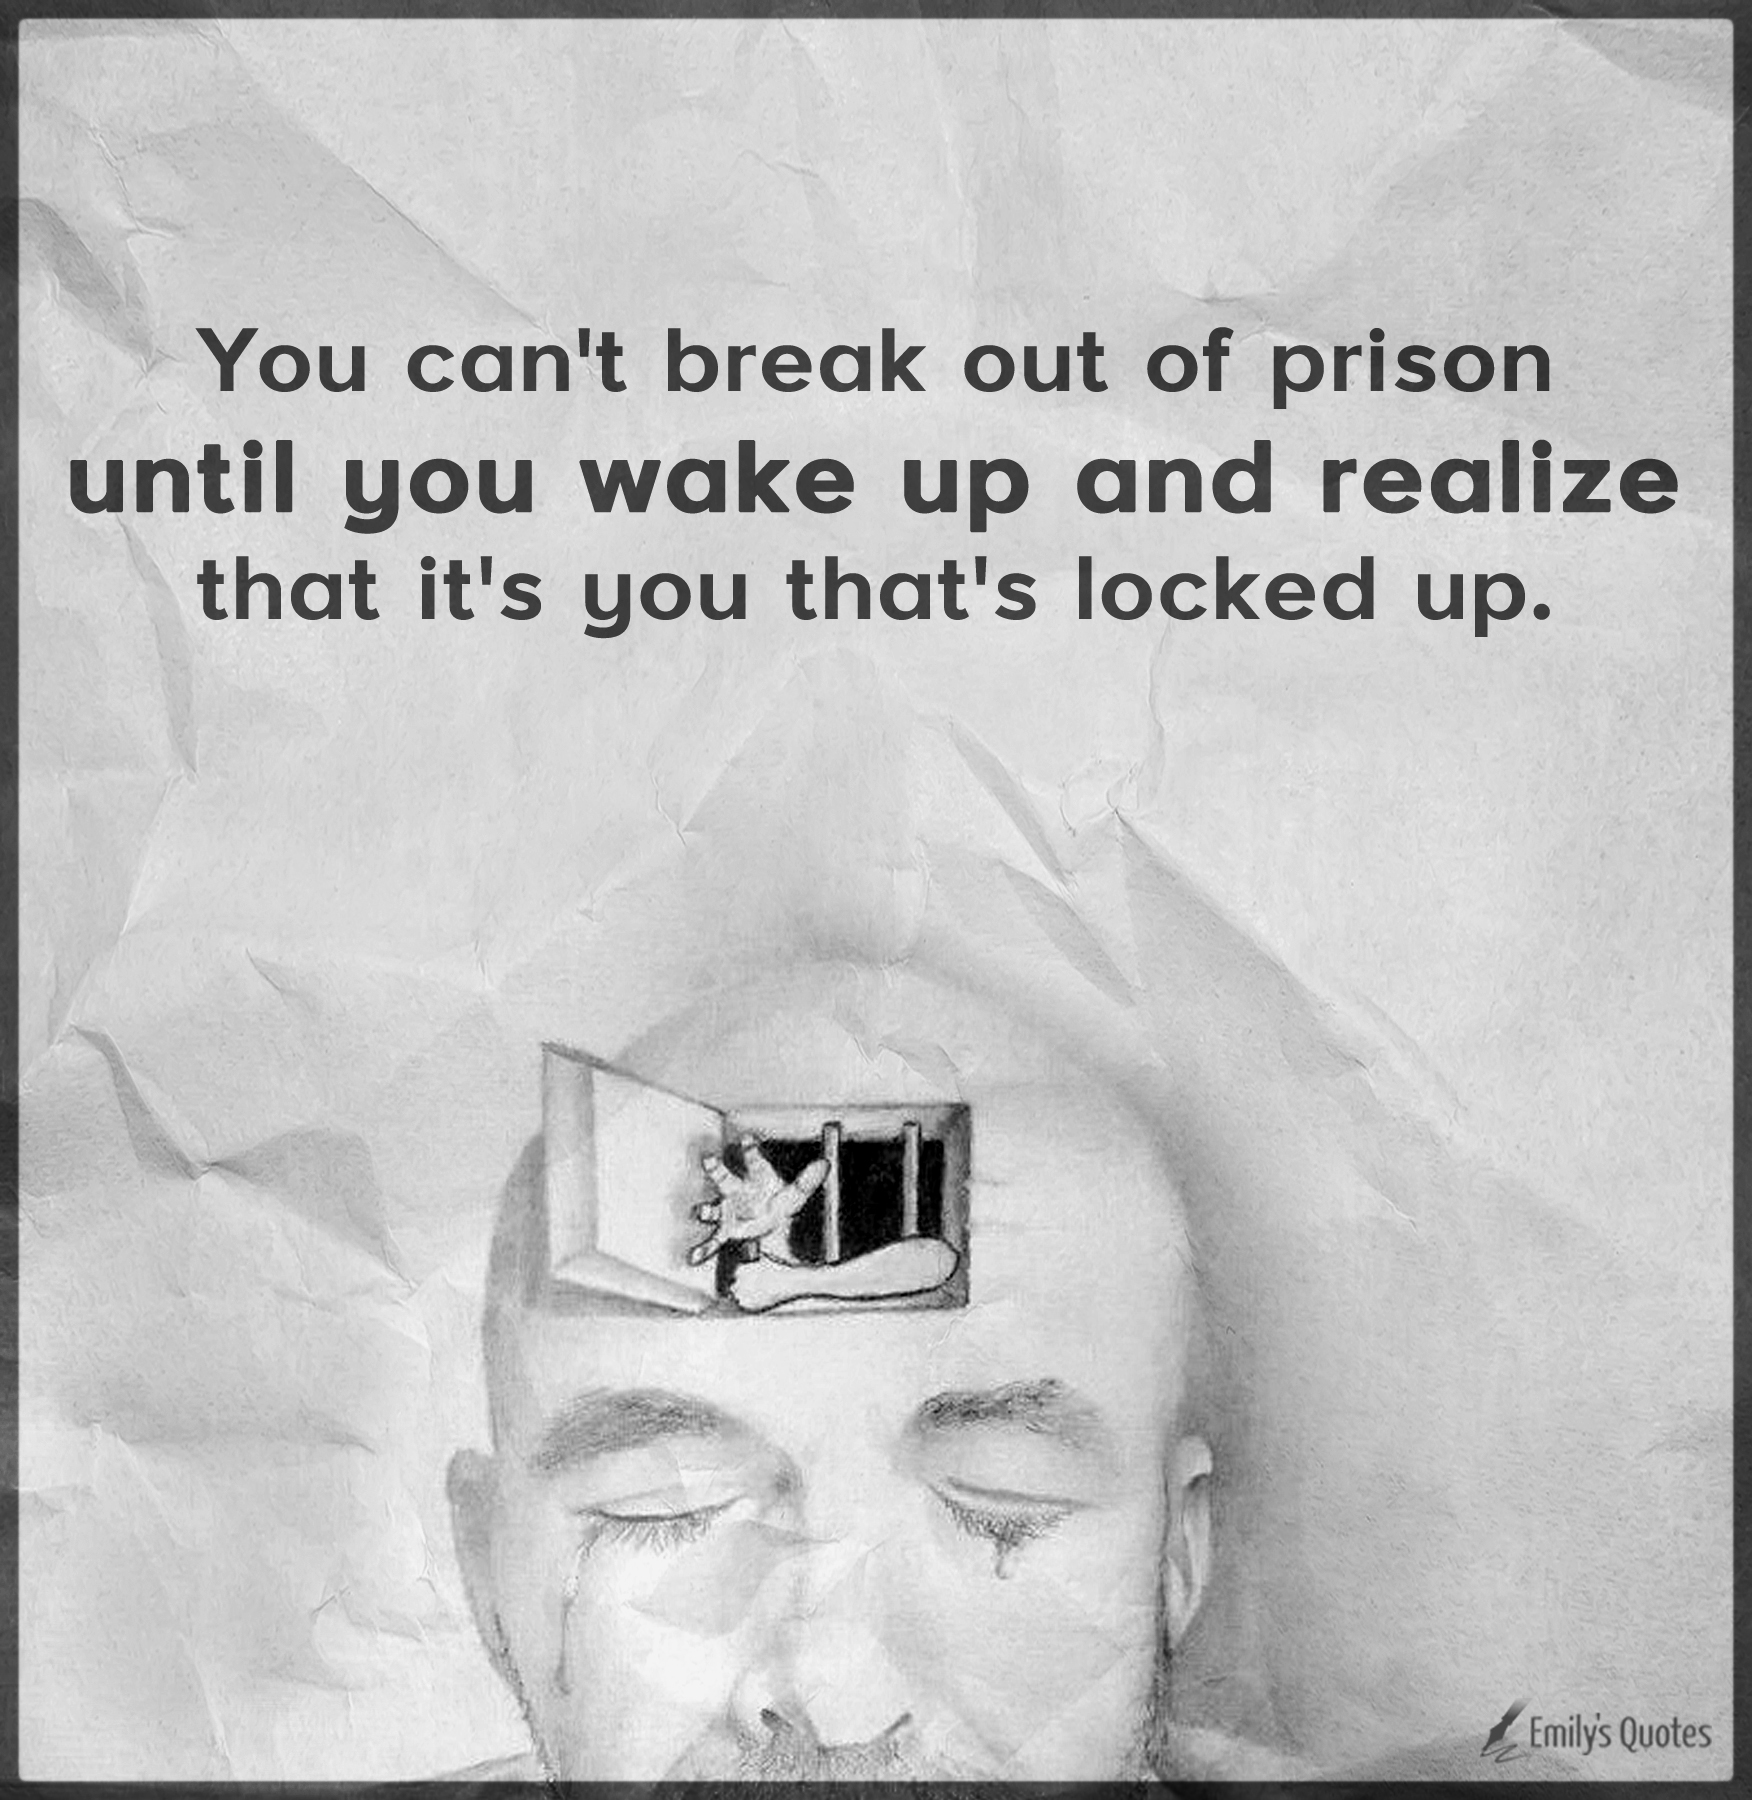 You can’t break out of prison until you wake up and realize that it’s you that’s locked up